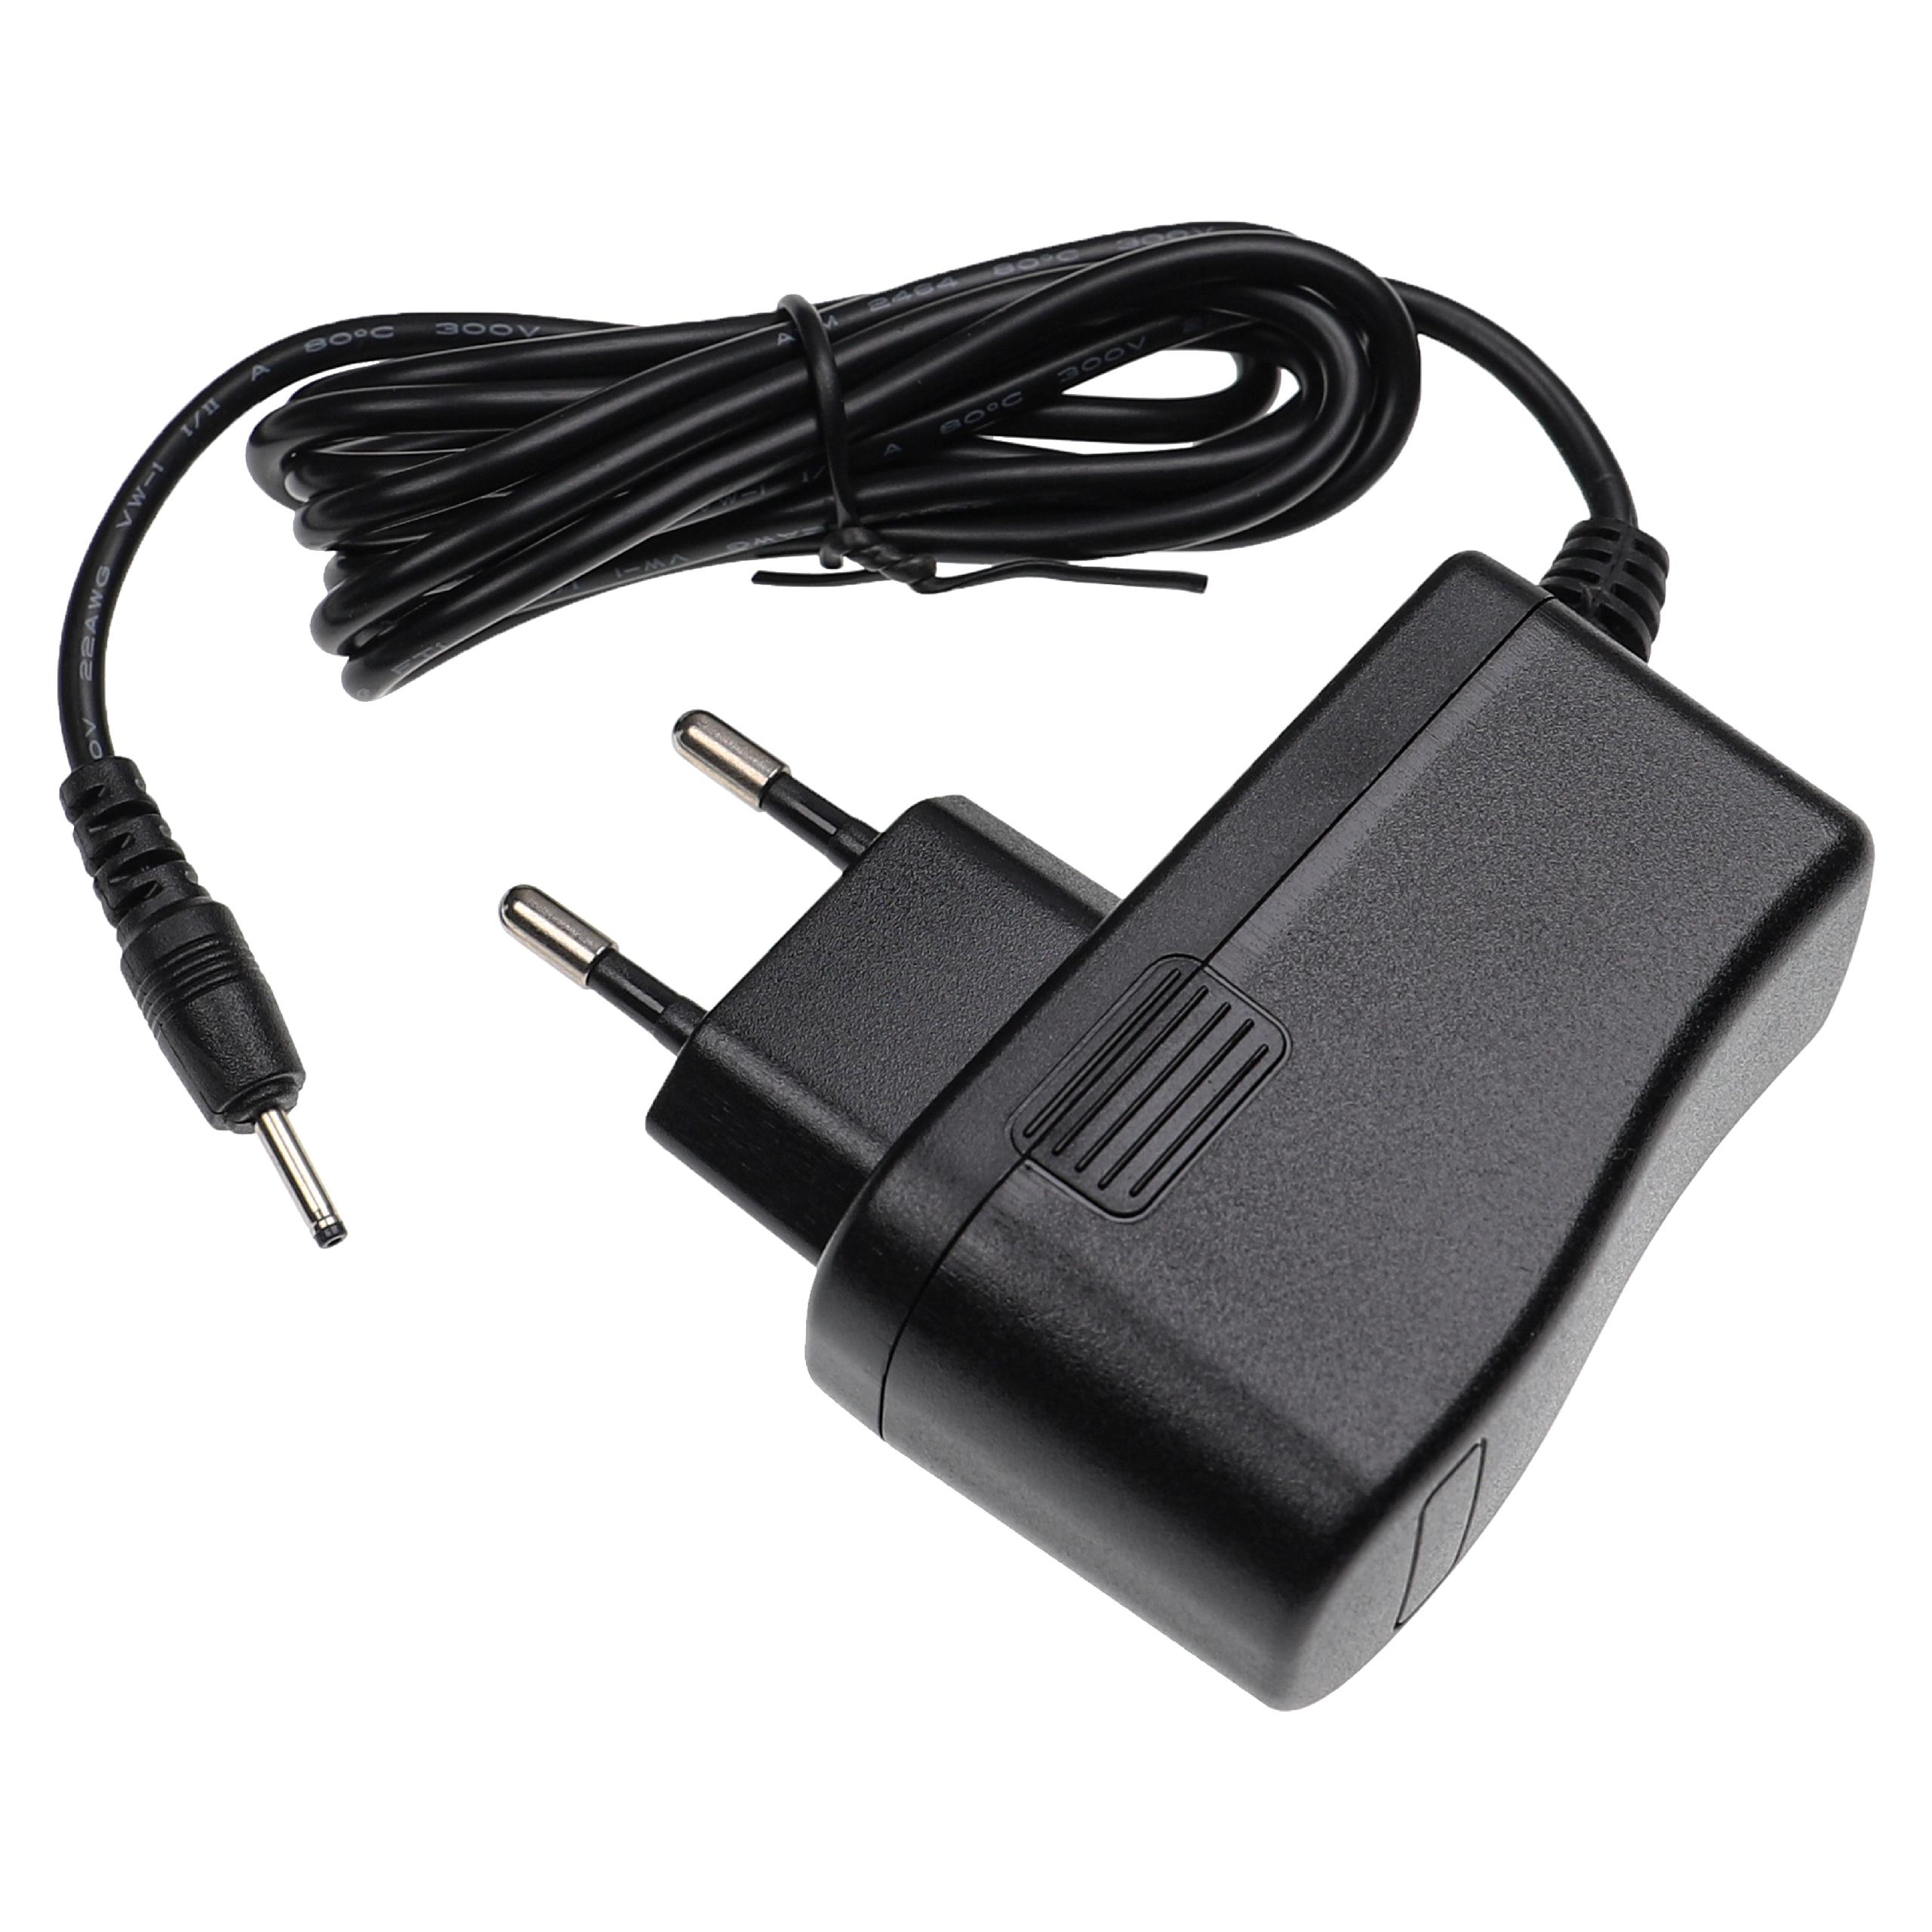 Mains Power Adapter replaces 8718469507771, 8718469505333, 8718469505241 for Tablet etc. - 200 cm